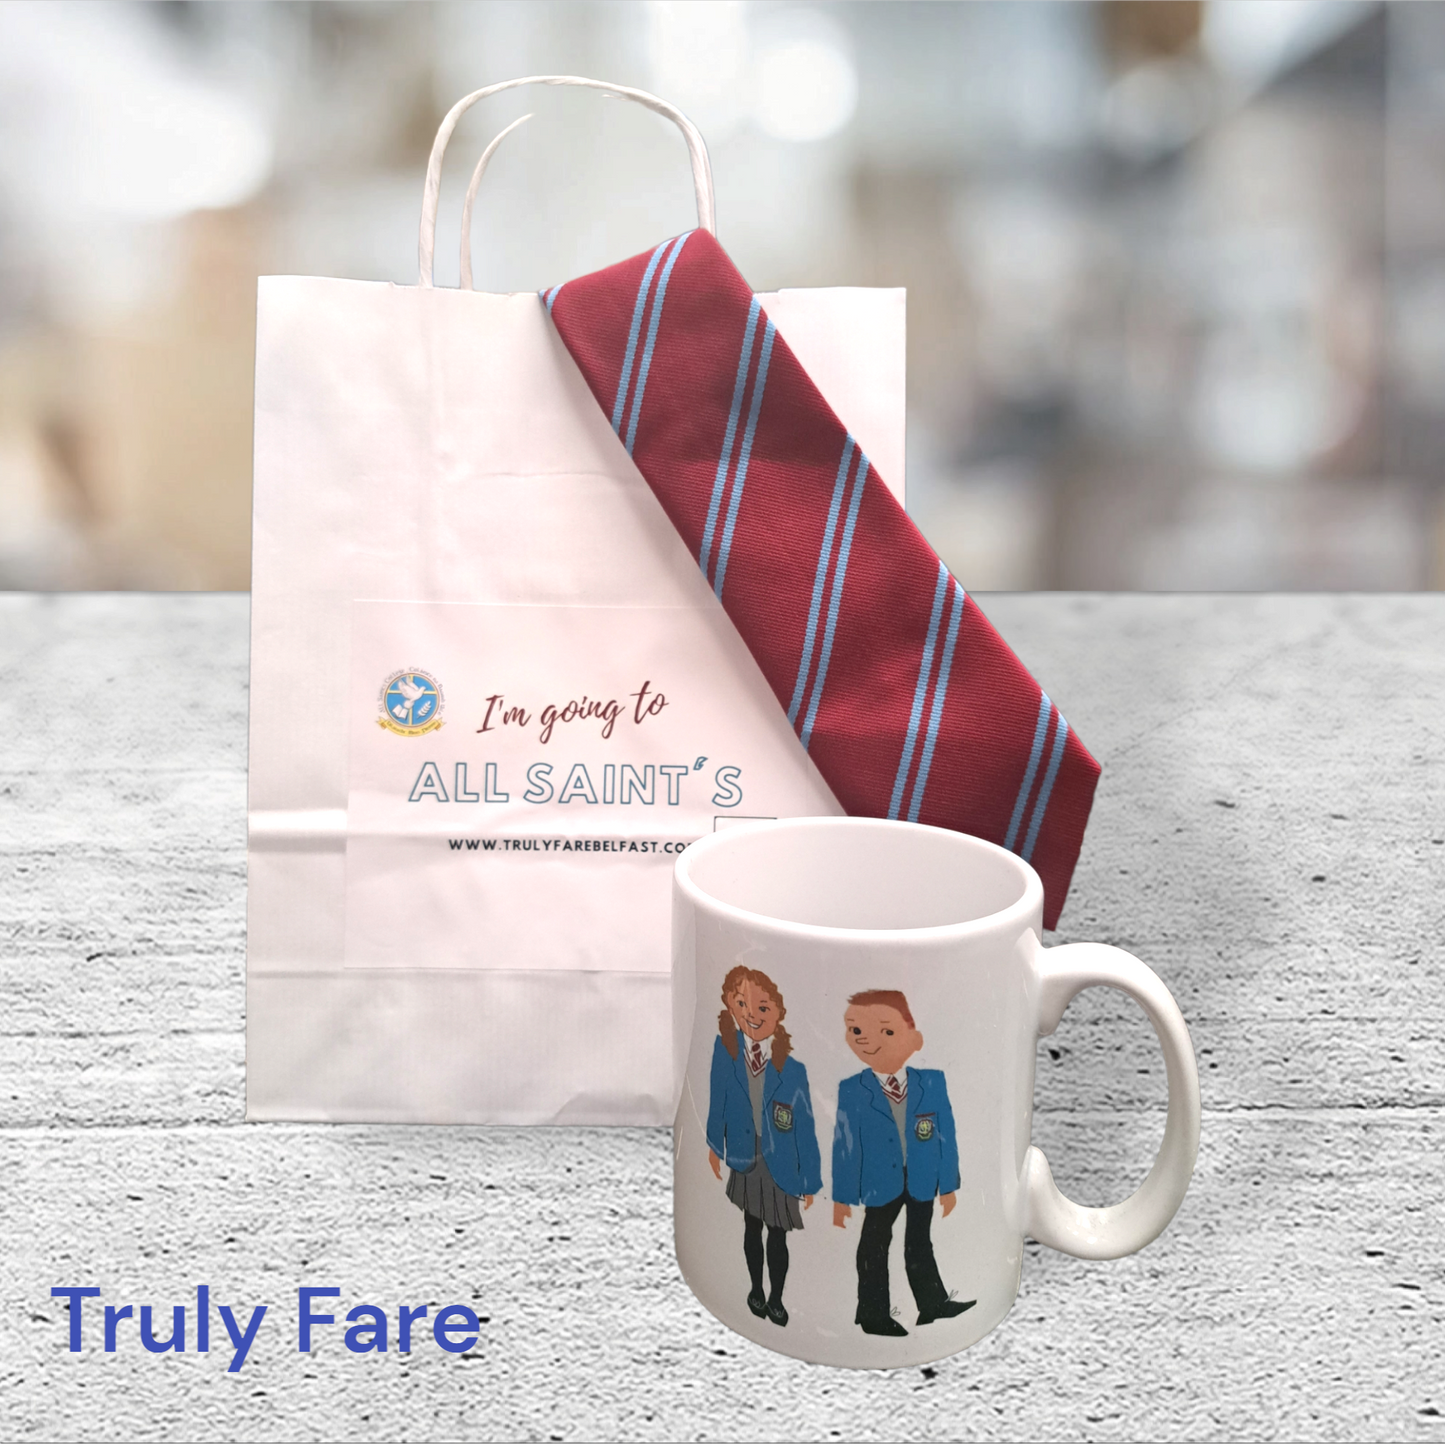 All Saint's tie, cup and gift bag set